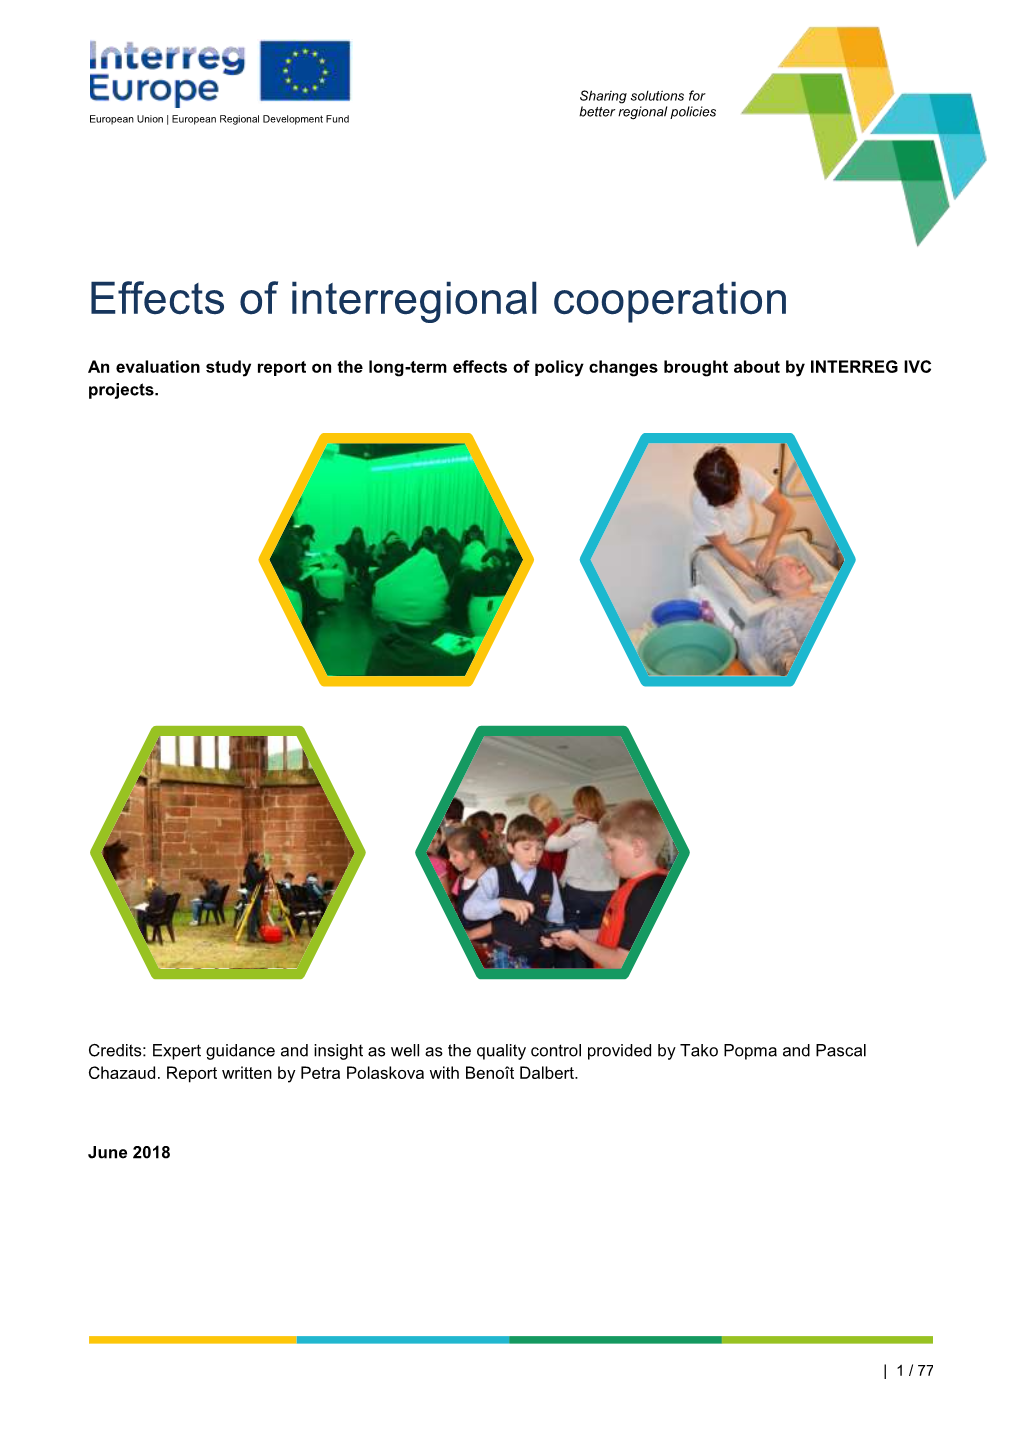 Effects of Interregional Cooperation Projects More Systematic, Interreg Europe Launched an Evaluation Study of the Projects Co-Funded by Its Predecessor